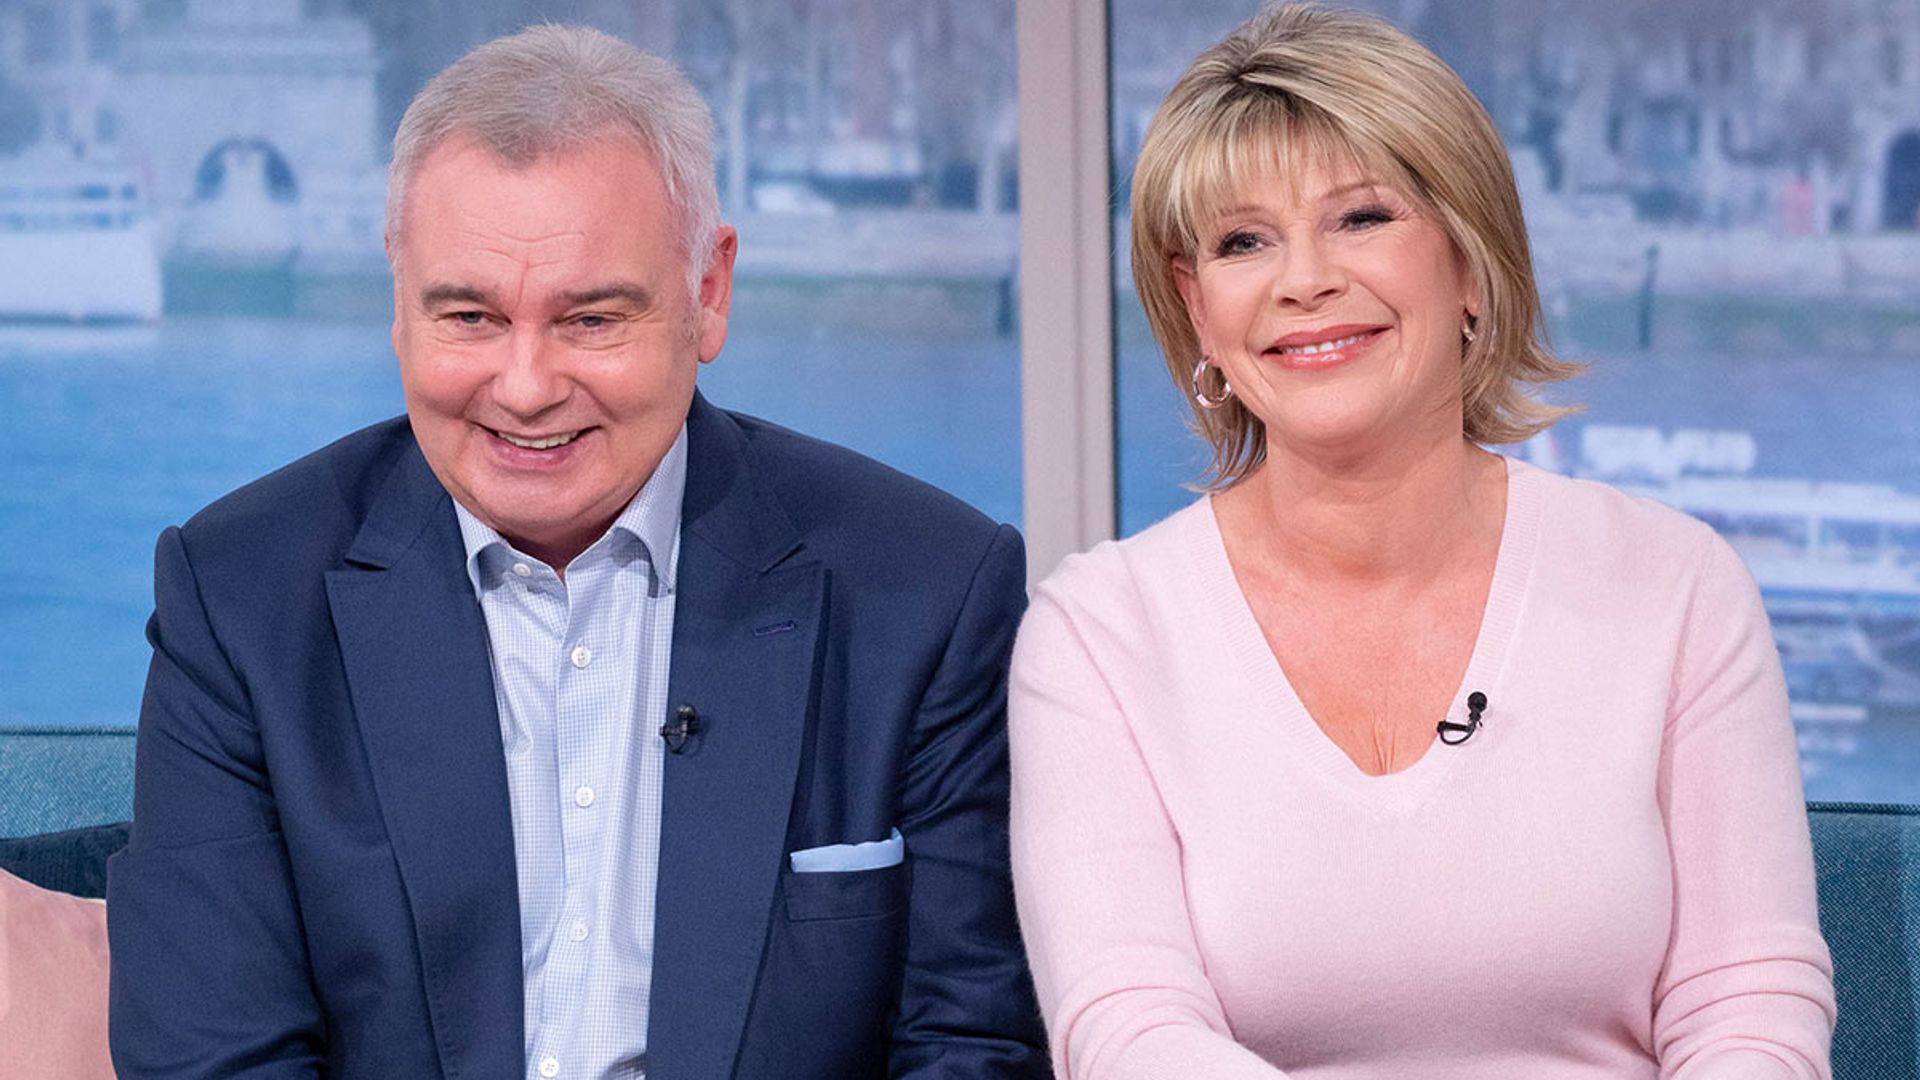 Ruth Langsford and Eamonn Holmes' son Jack interrupts live interview for sweet reason